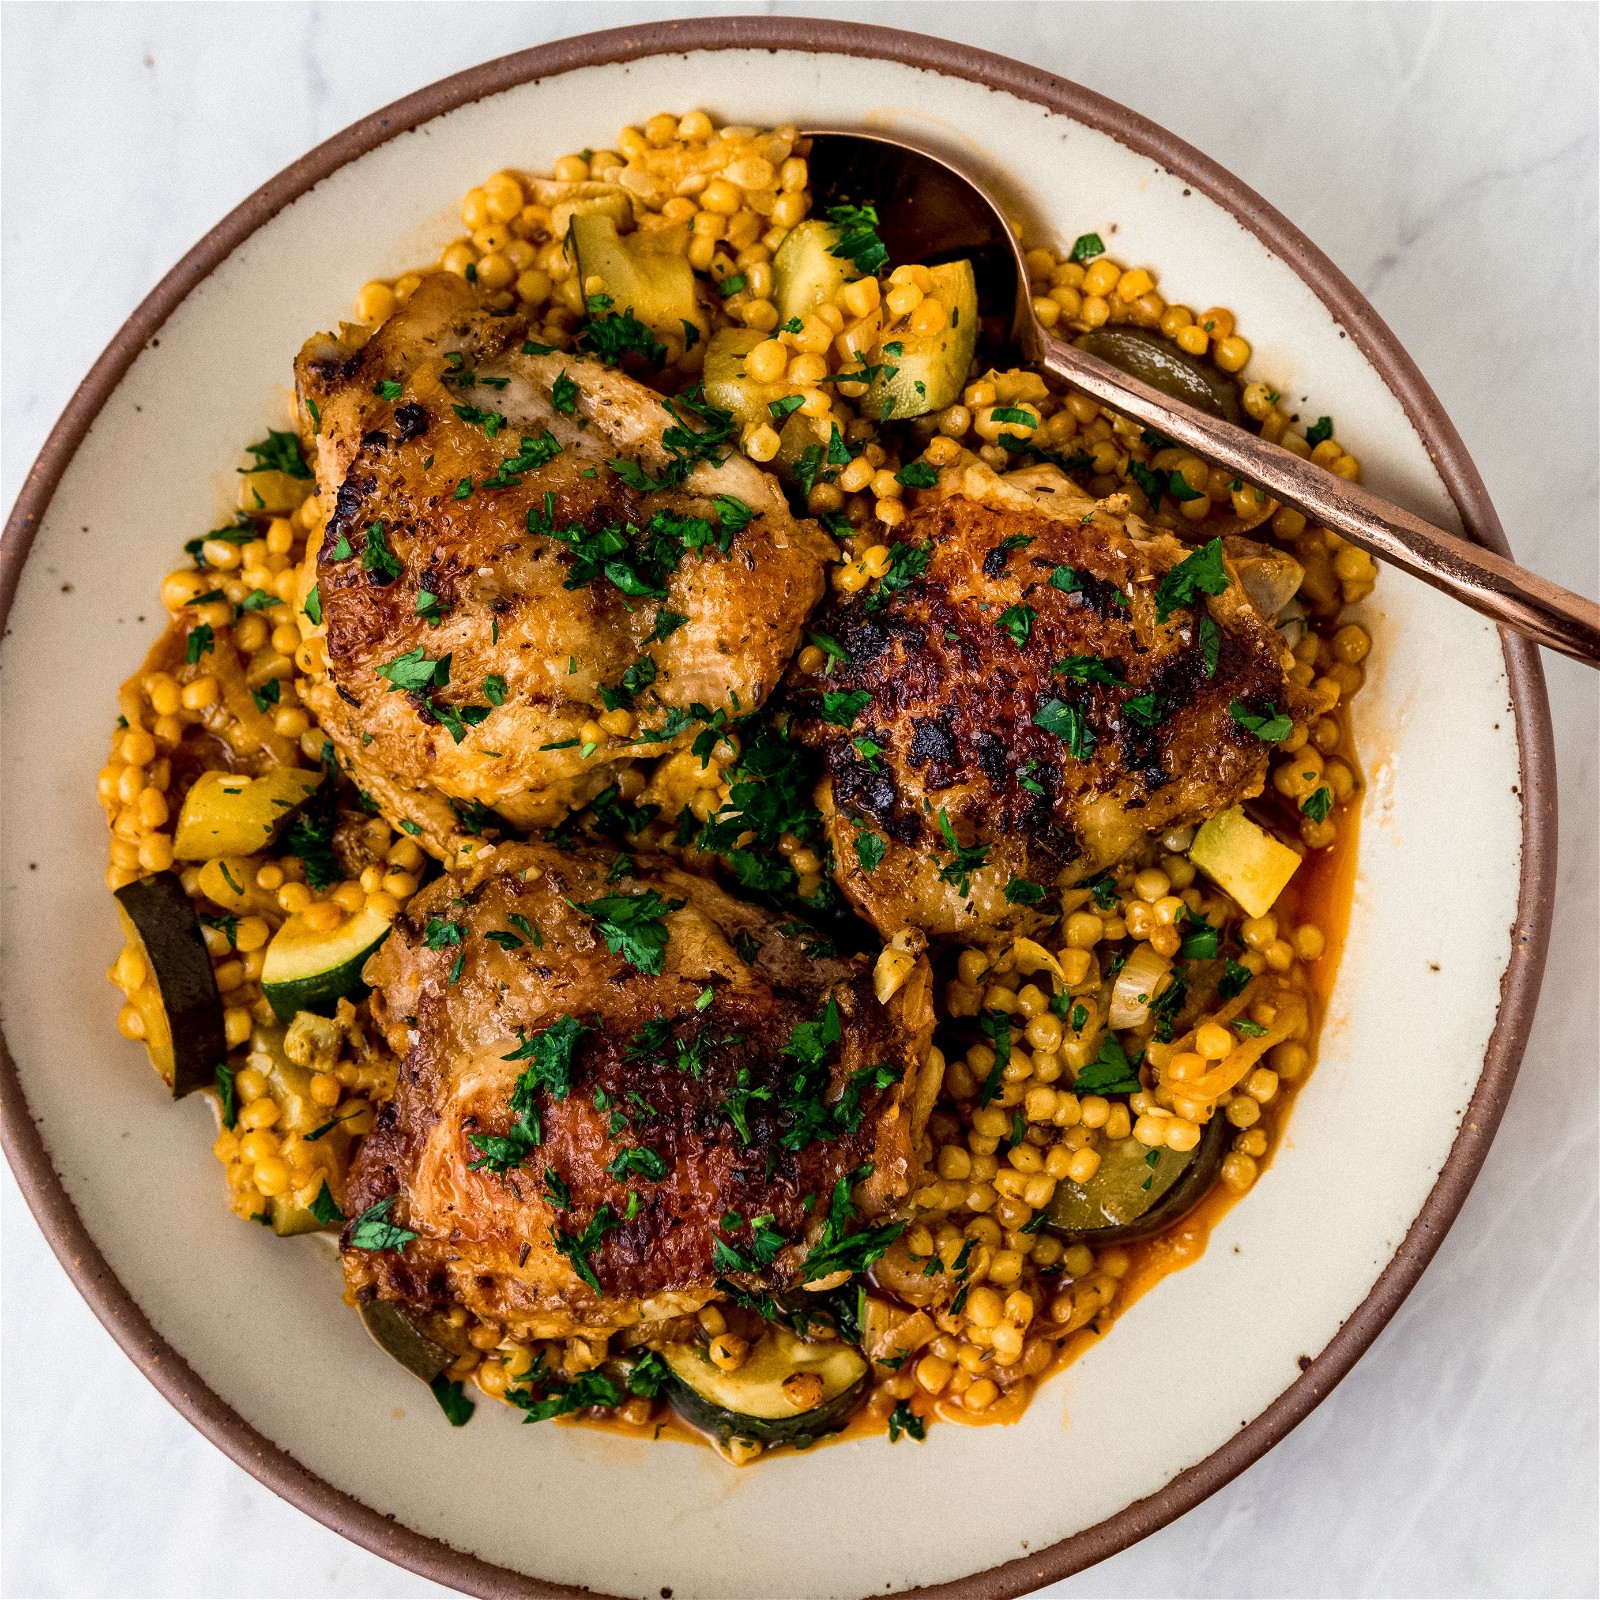 Image of Garlic-Lemon Chicken with Saffron Pearl Couscous and Zucchini